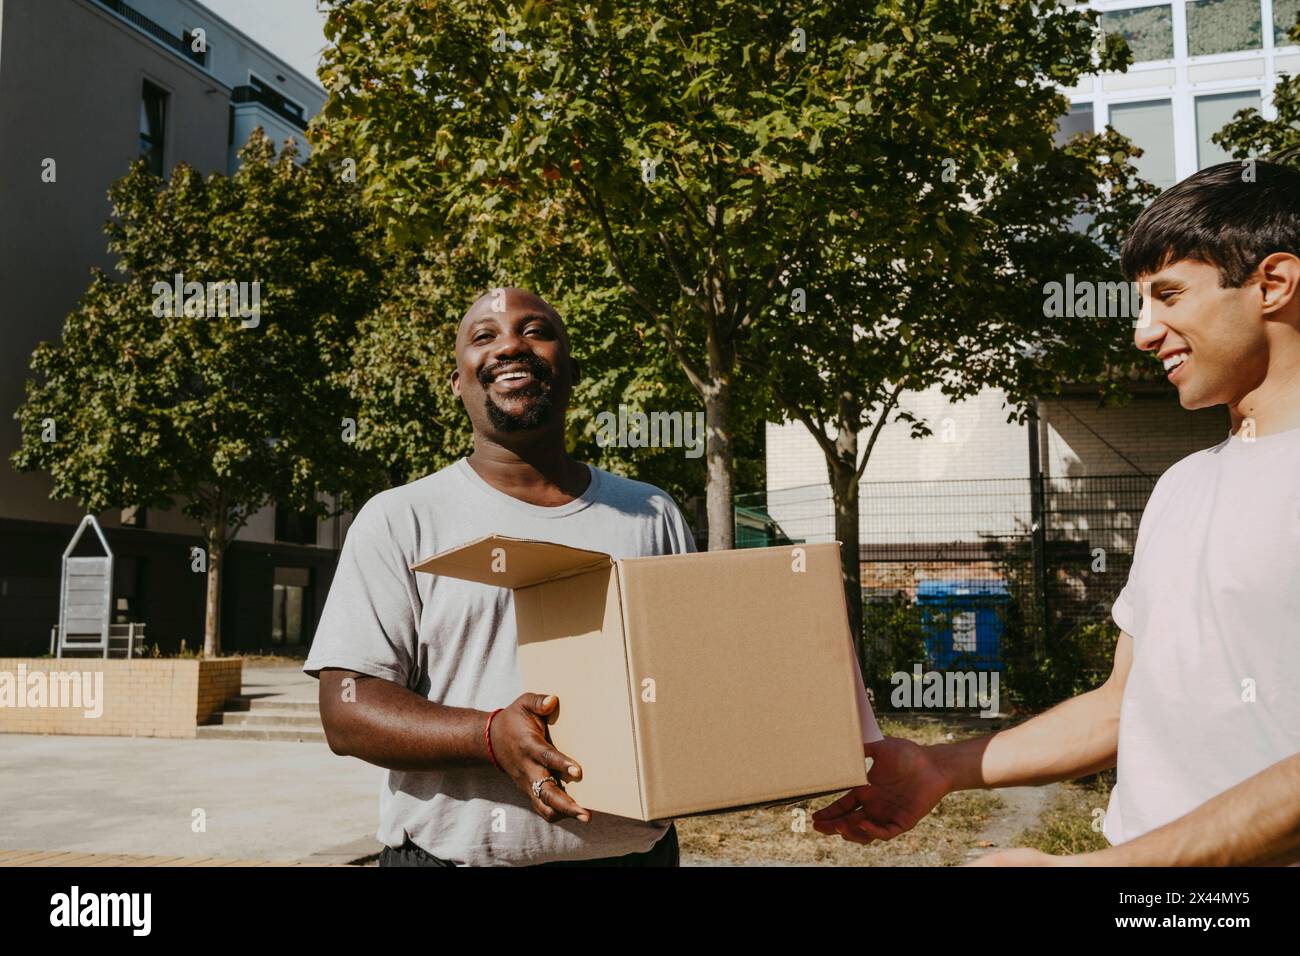 Smiling male volunteer passing donation box to teammate during charity drive at community center Stock Photo